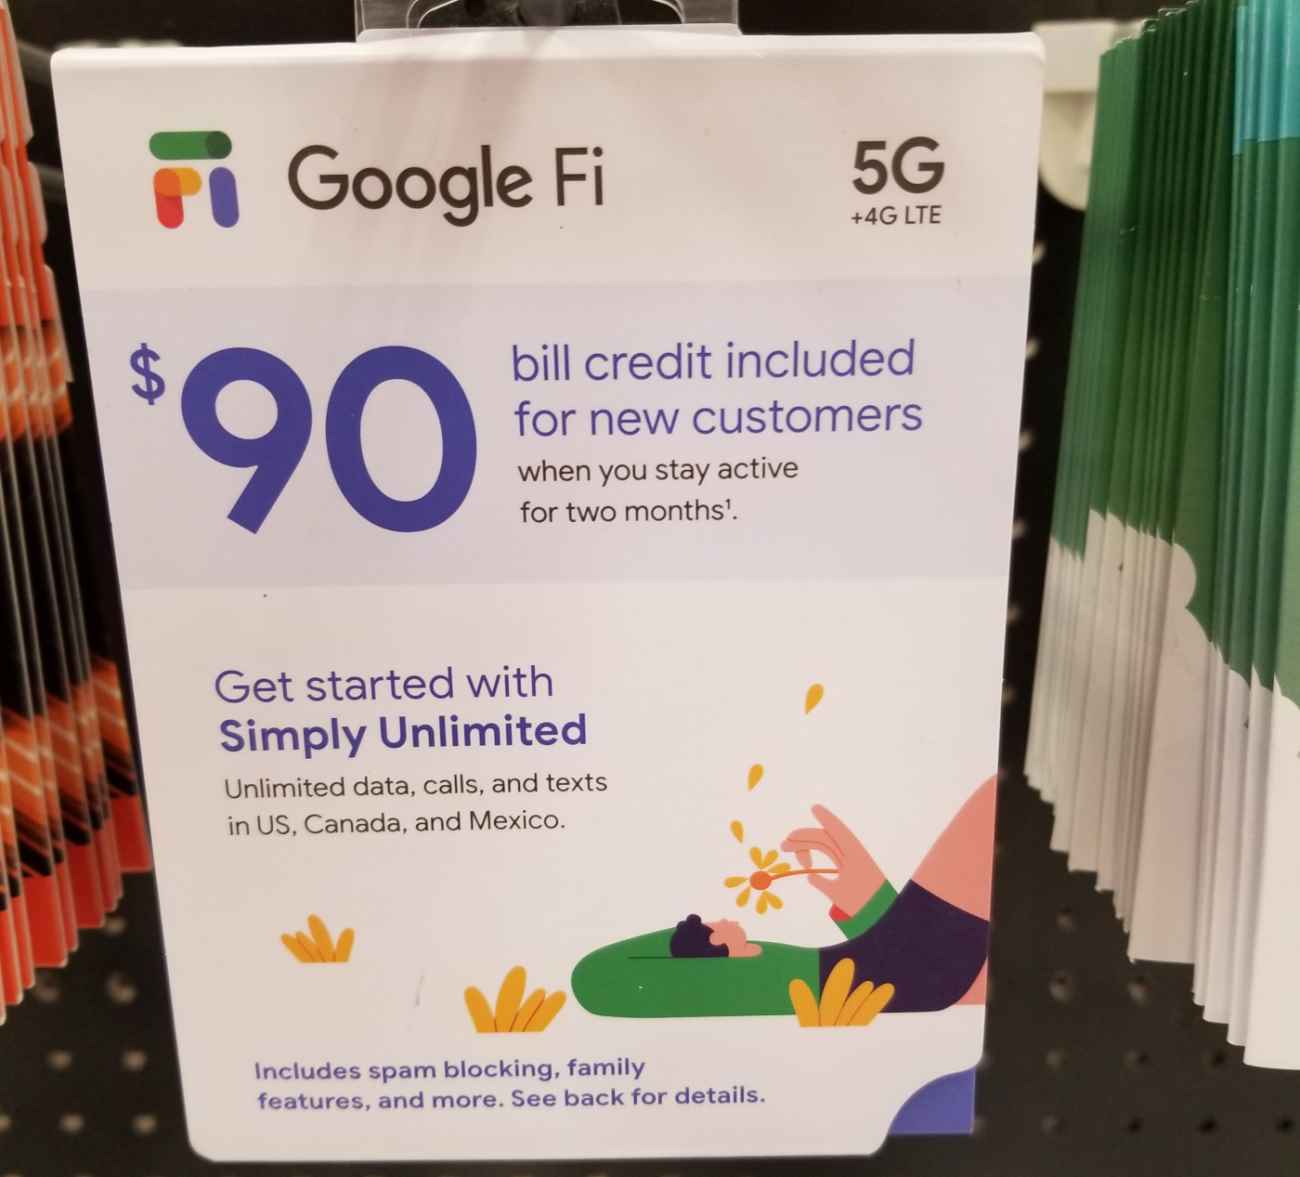 Google Fi Simply Unlimited SIM Kit On Display At A Target Local To BestMVNO